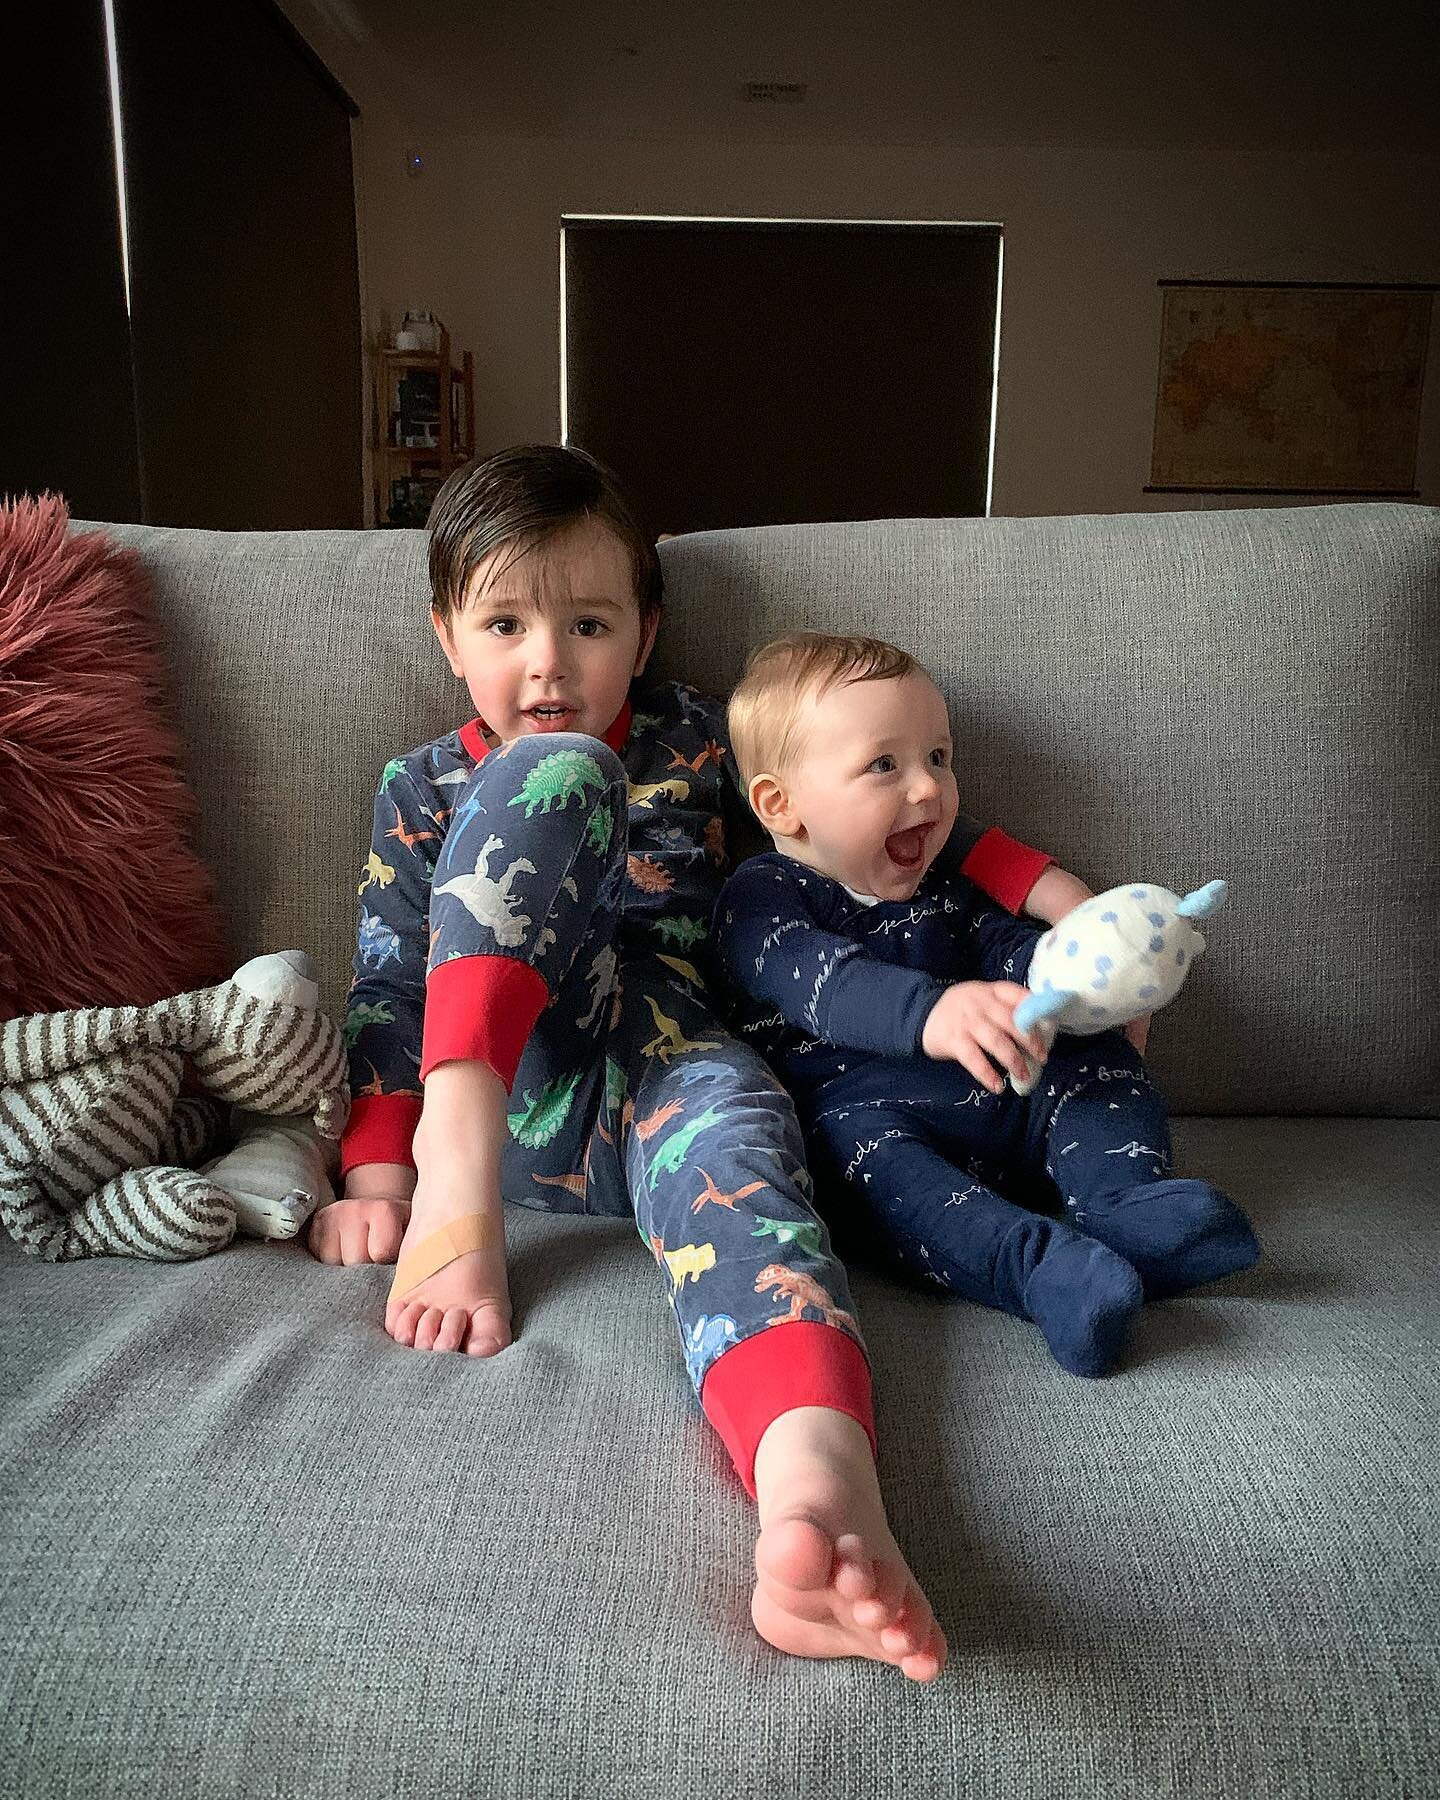 Brothers 😍
.
Question - Does anyone have recommendations for summer sleepwear that comes in a range of sizes from Archie size to Mum and dad size?